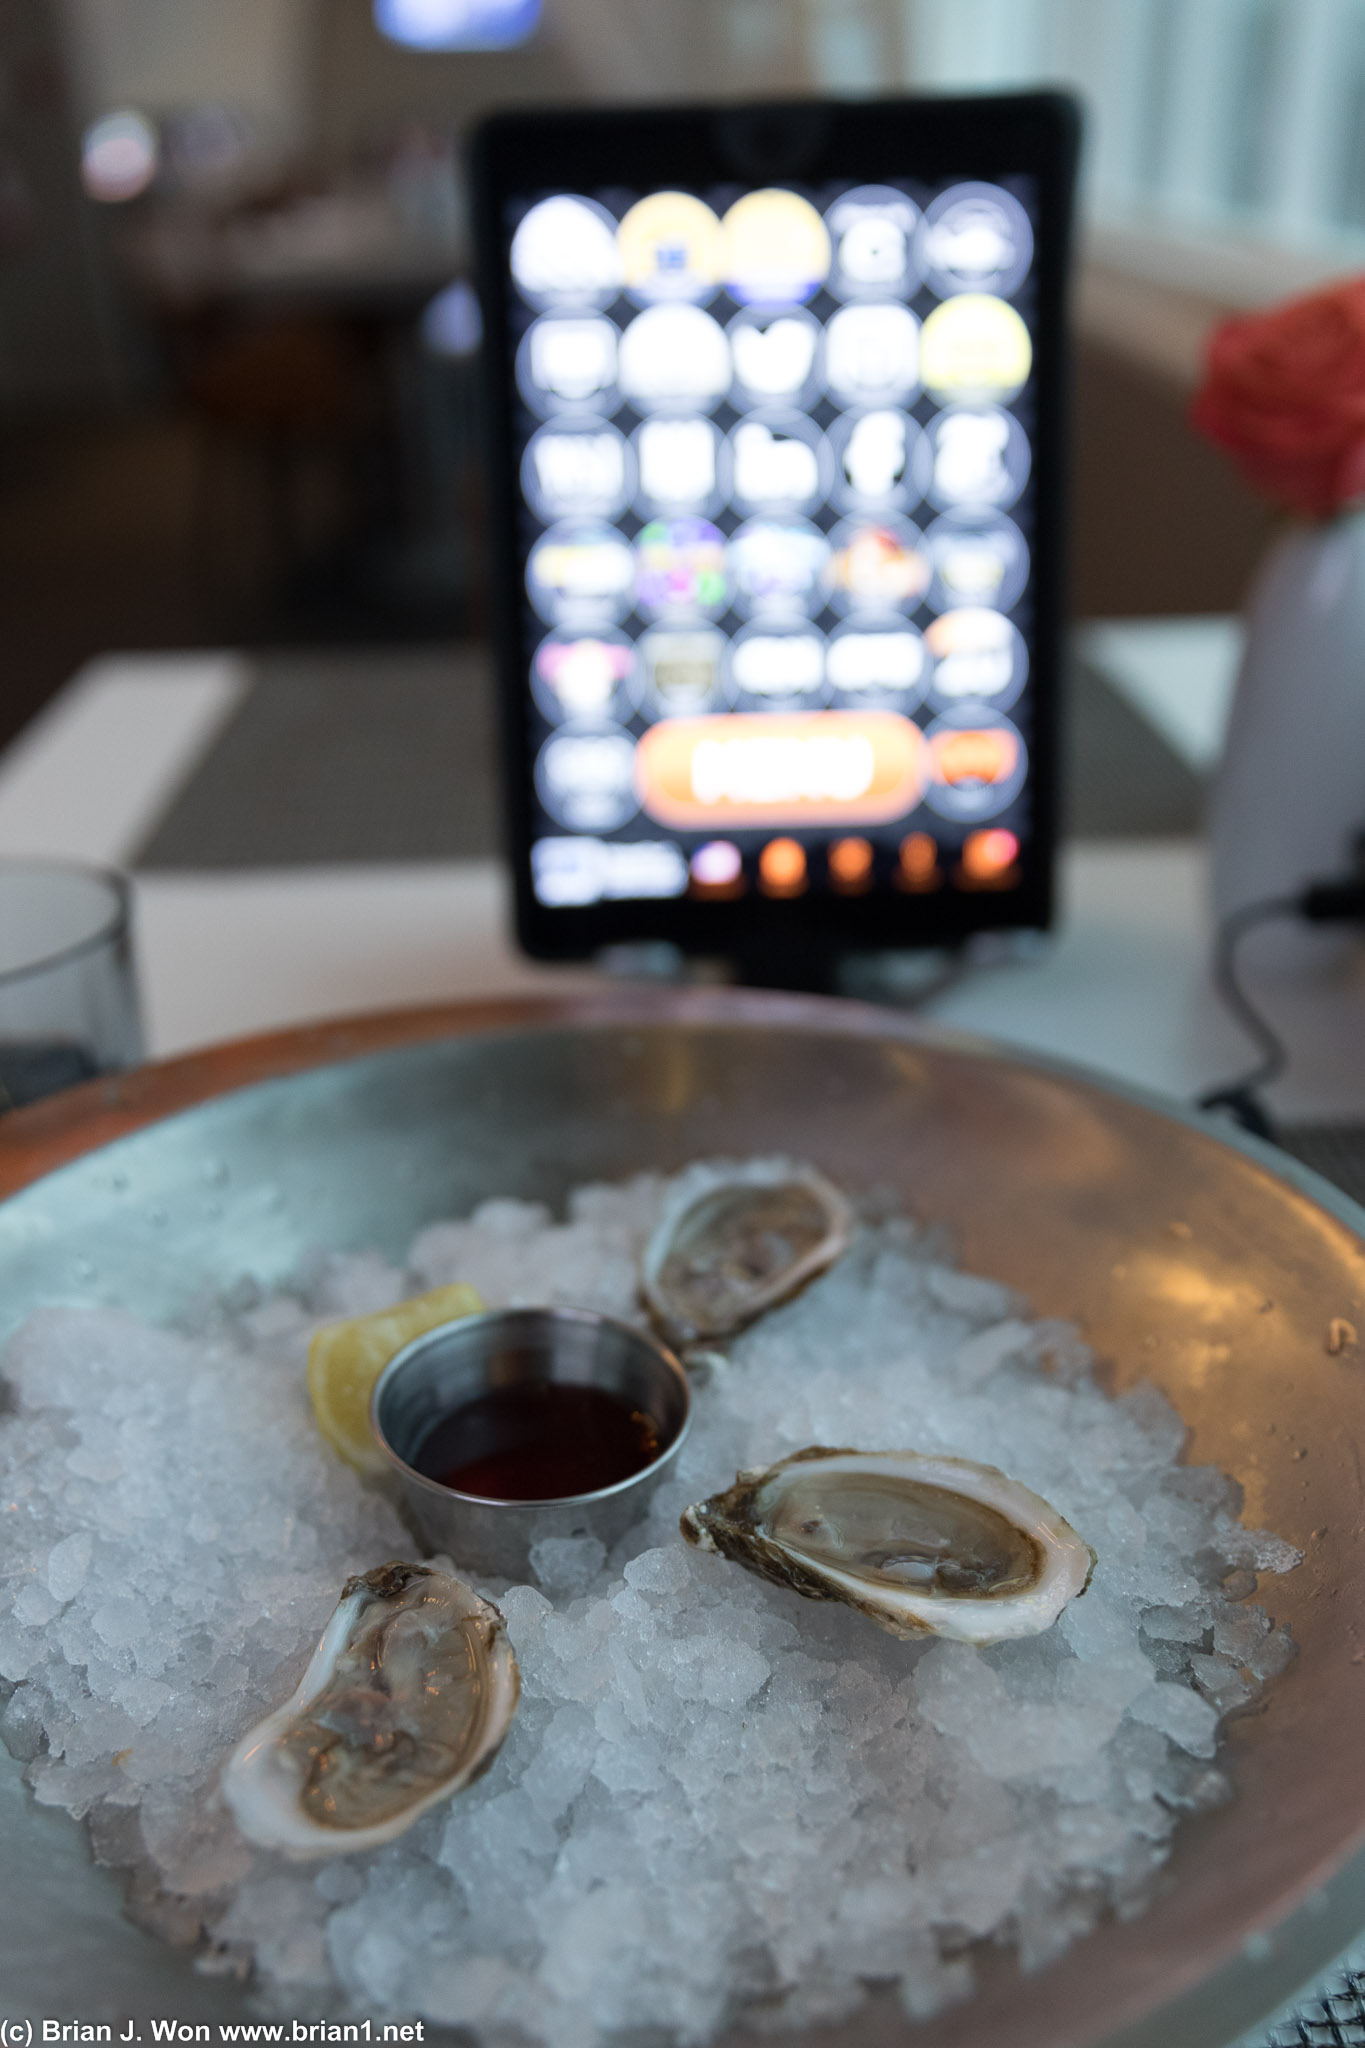 Tiny oysters, dwarfed by the iPads everywhere at EWR's restaurants.